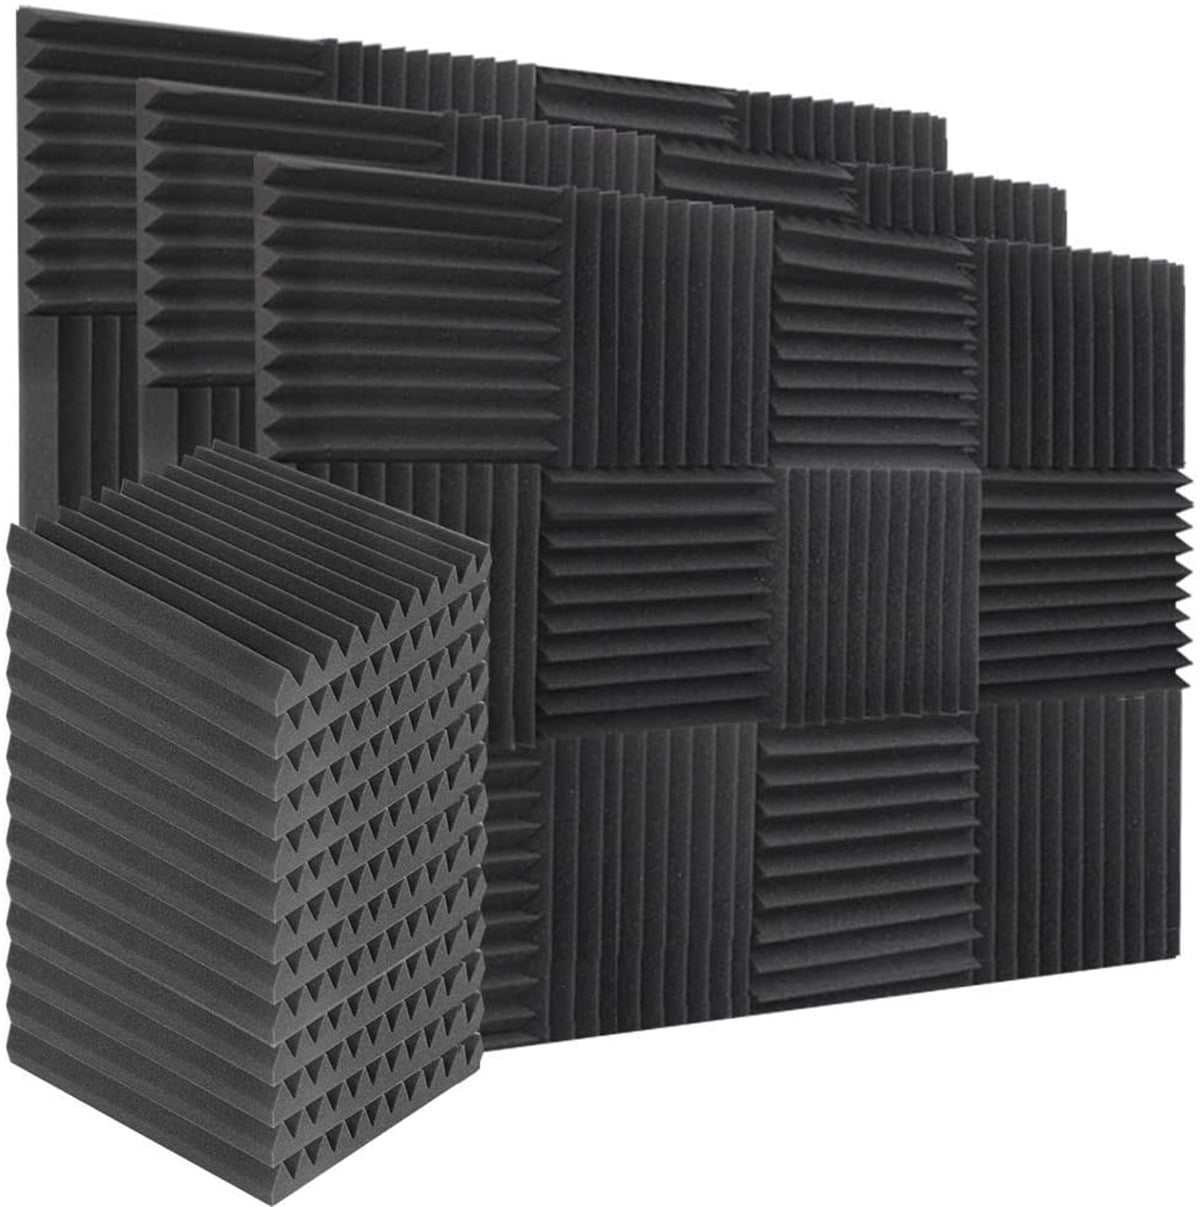 Pyramid Recording Studio Wedge Tiles Acoustic Foam Panels 2 X 12 X 12 Isolation Treatment for Walls and Ceiling 24 Pack, Black 